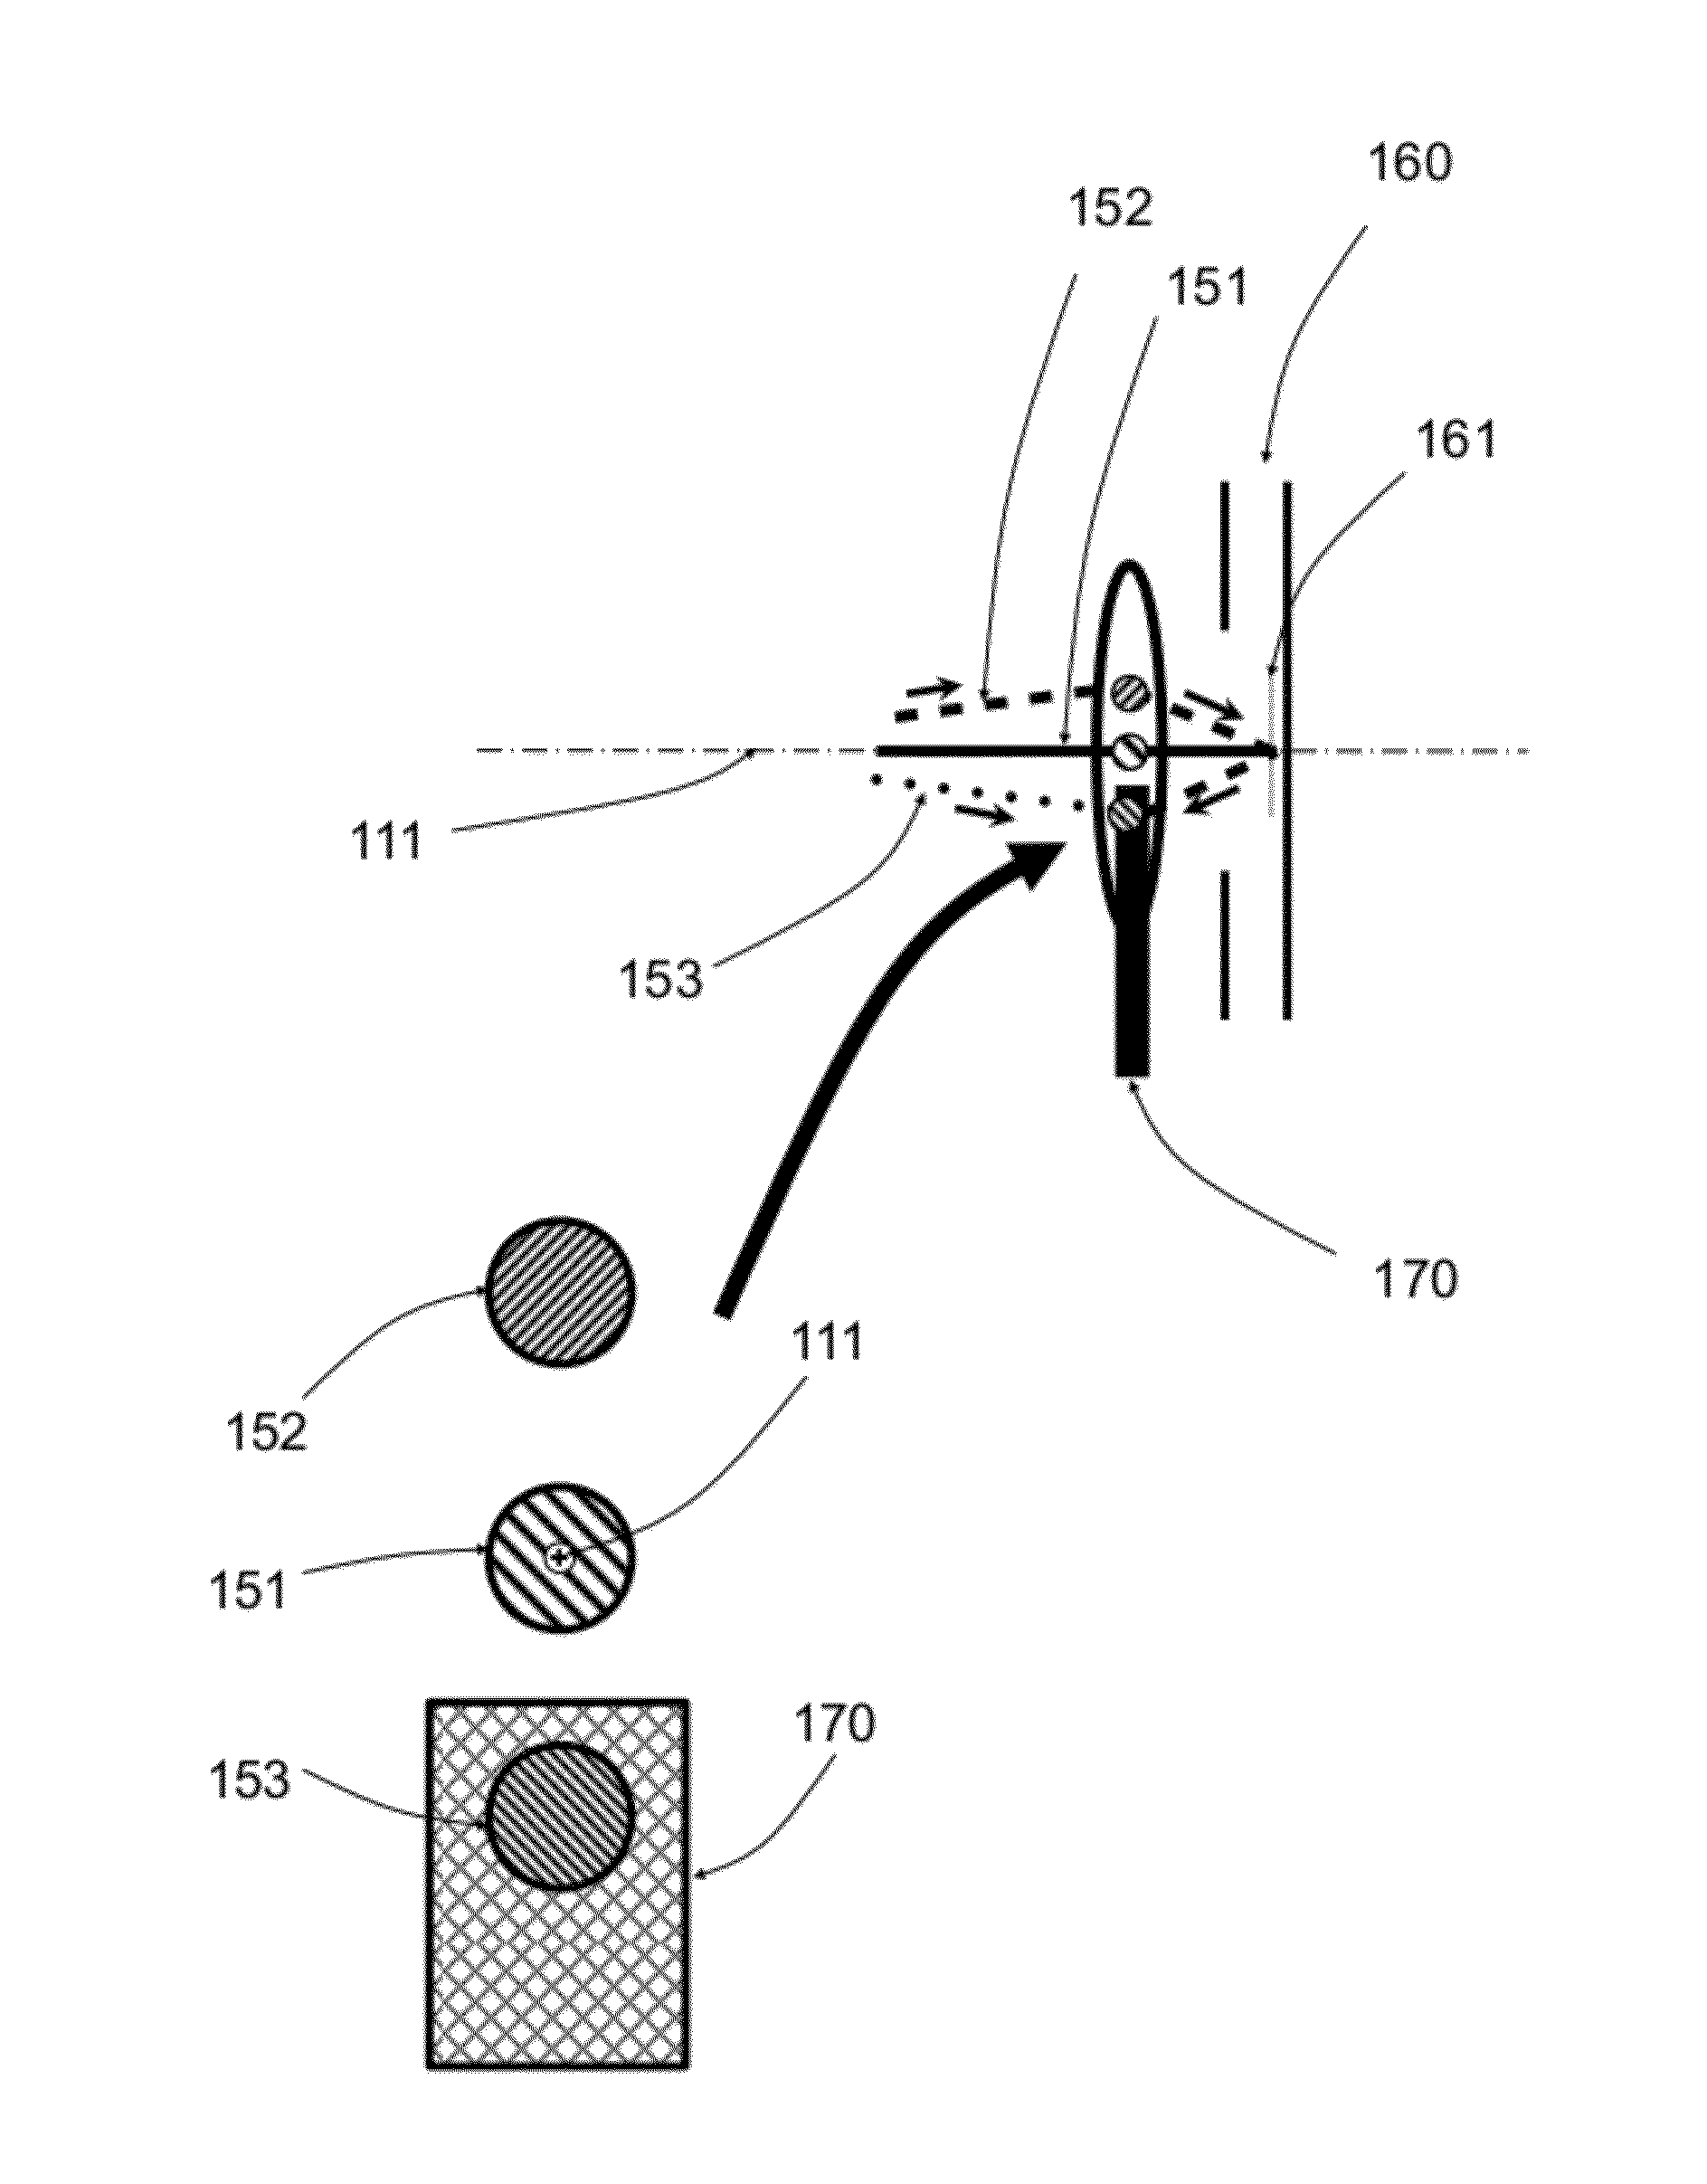 Mirror monochromator for charged particle beam apparatus